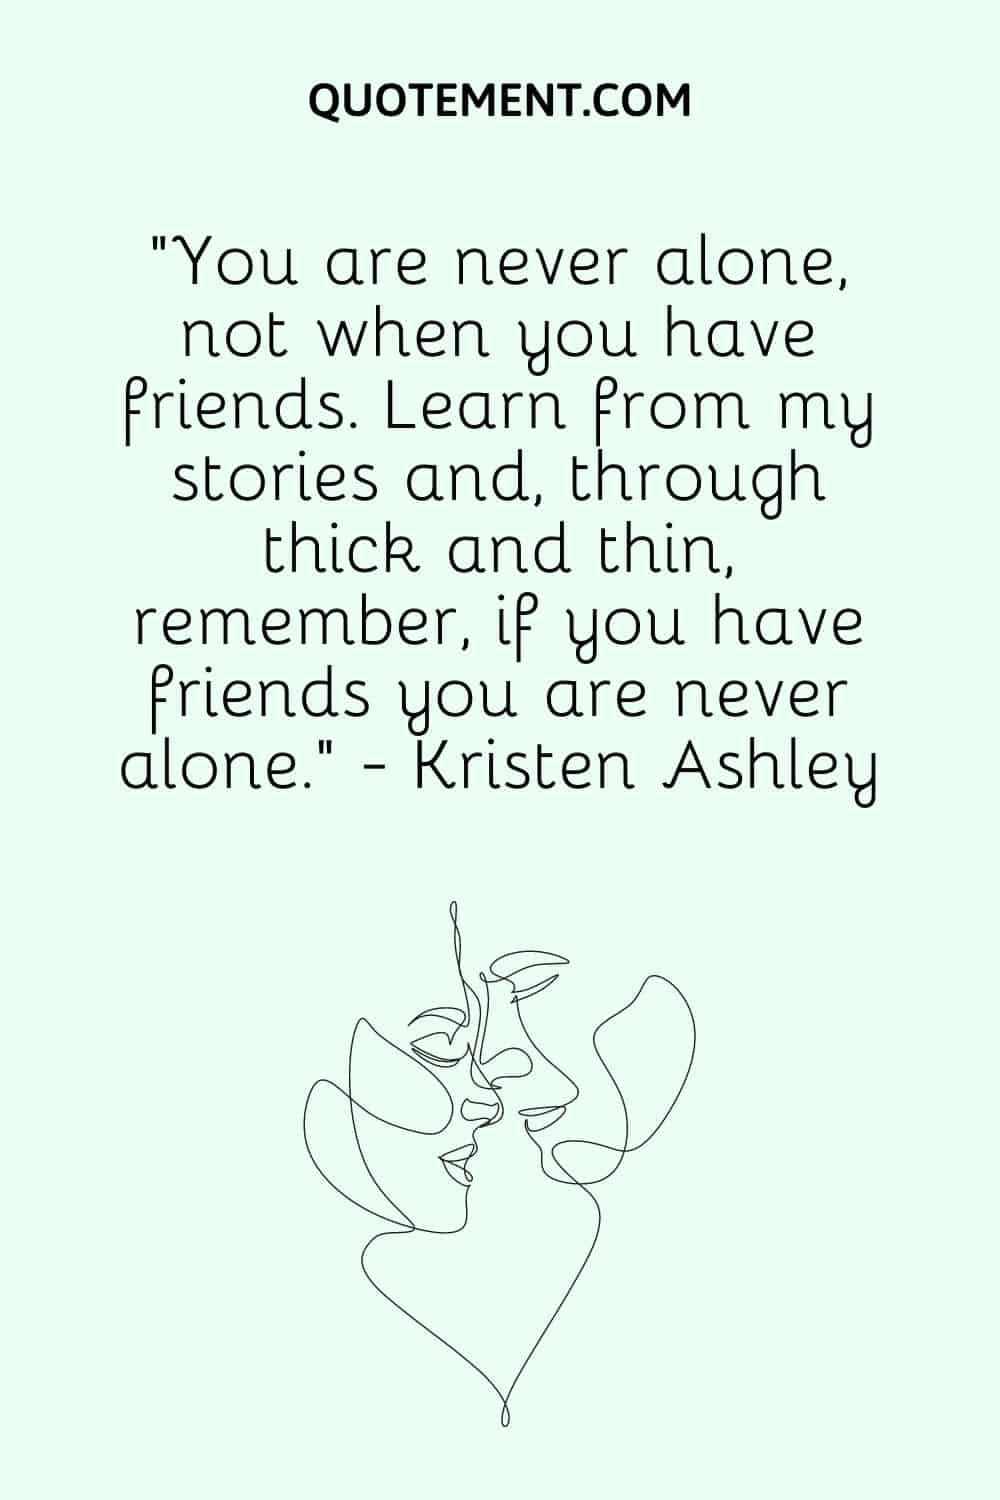 “You are never alone, not when you have friends. Learn from my stories and, through thick and thin, remember, if you have friends you are never alone.” - Kristen Ashley